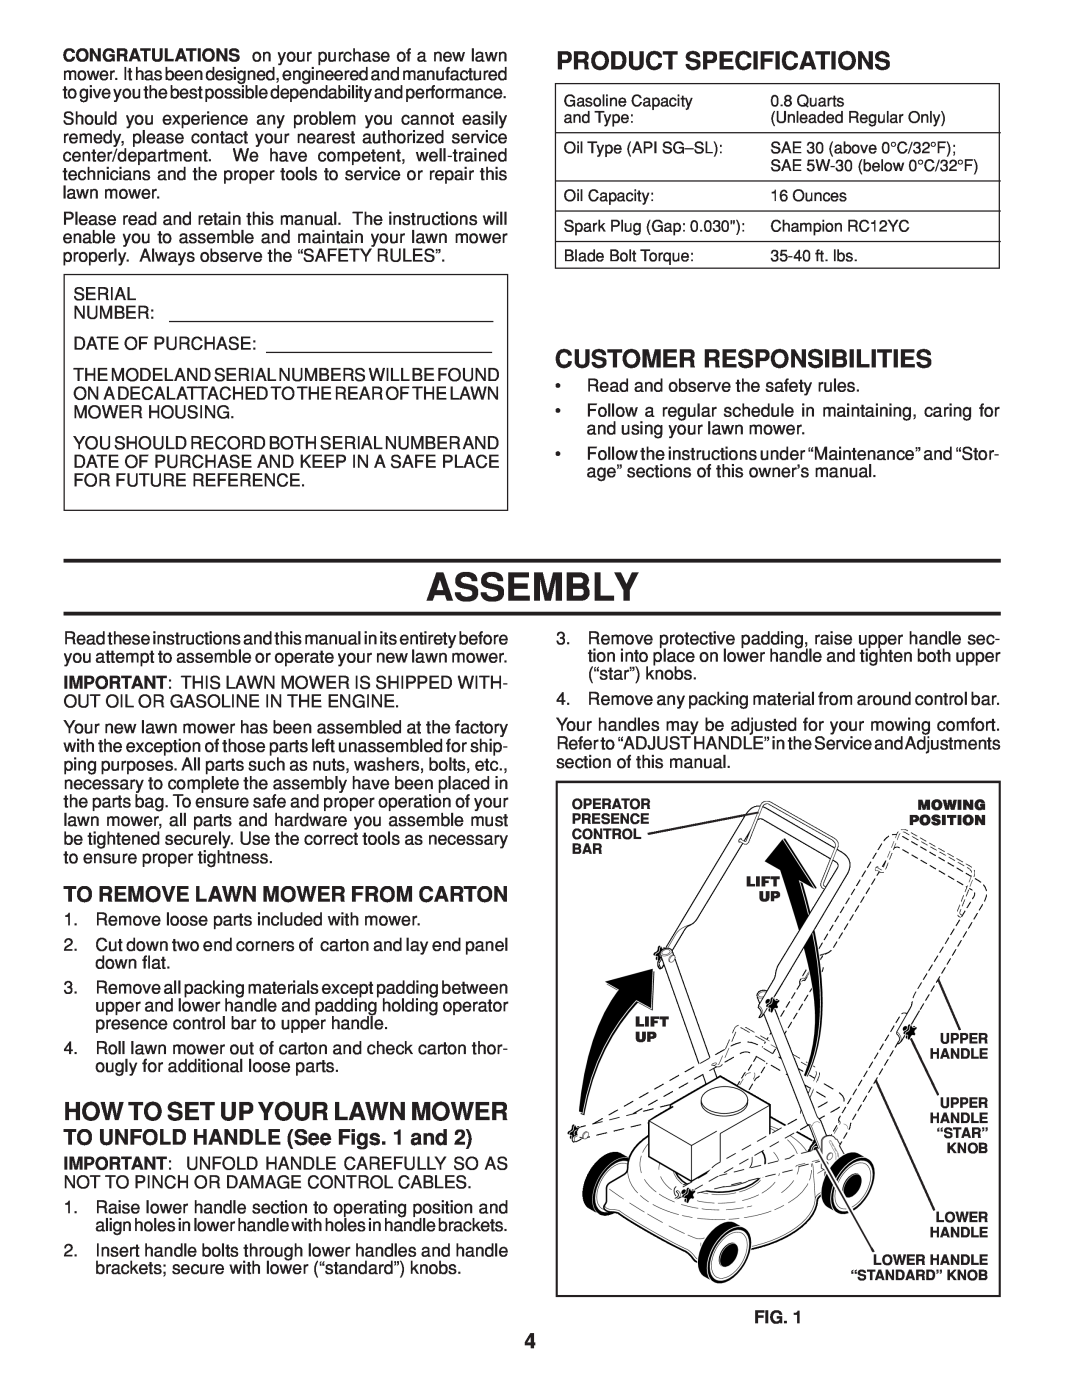 Husqvarna 961430096 warranty Assembly, Product Specifications, Customer Responsibilities, How To Set Up Your Lawn Mower 